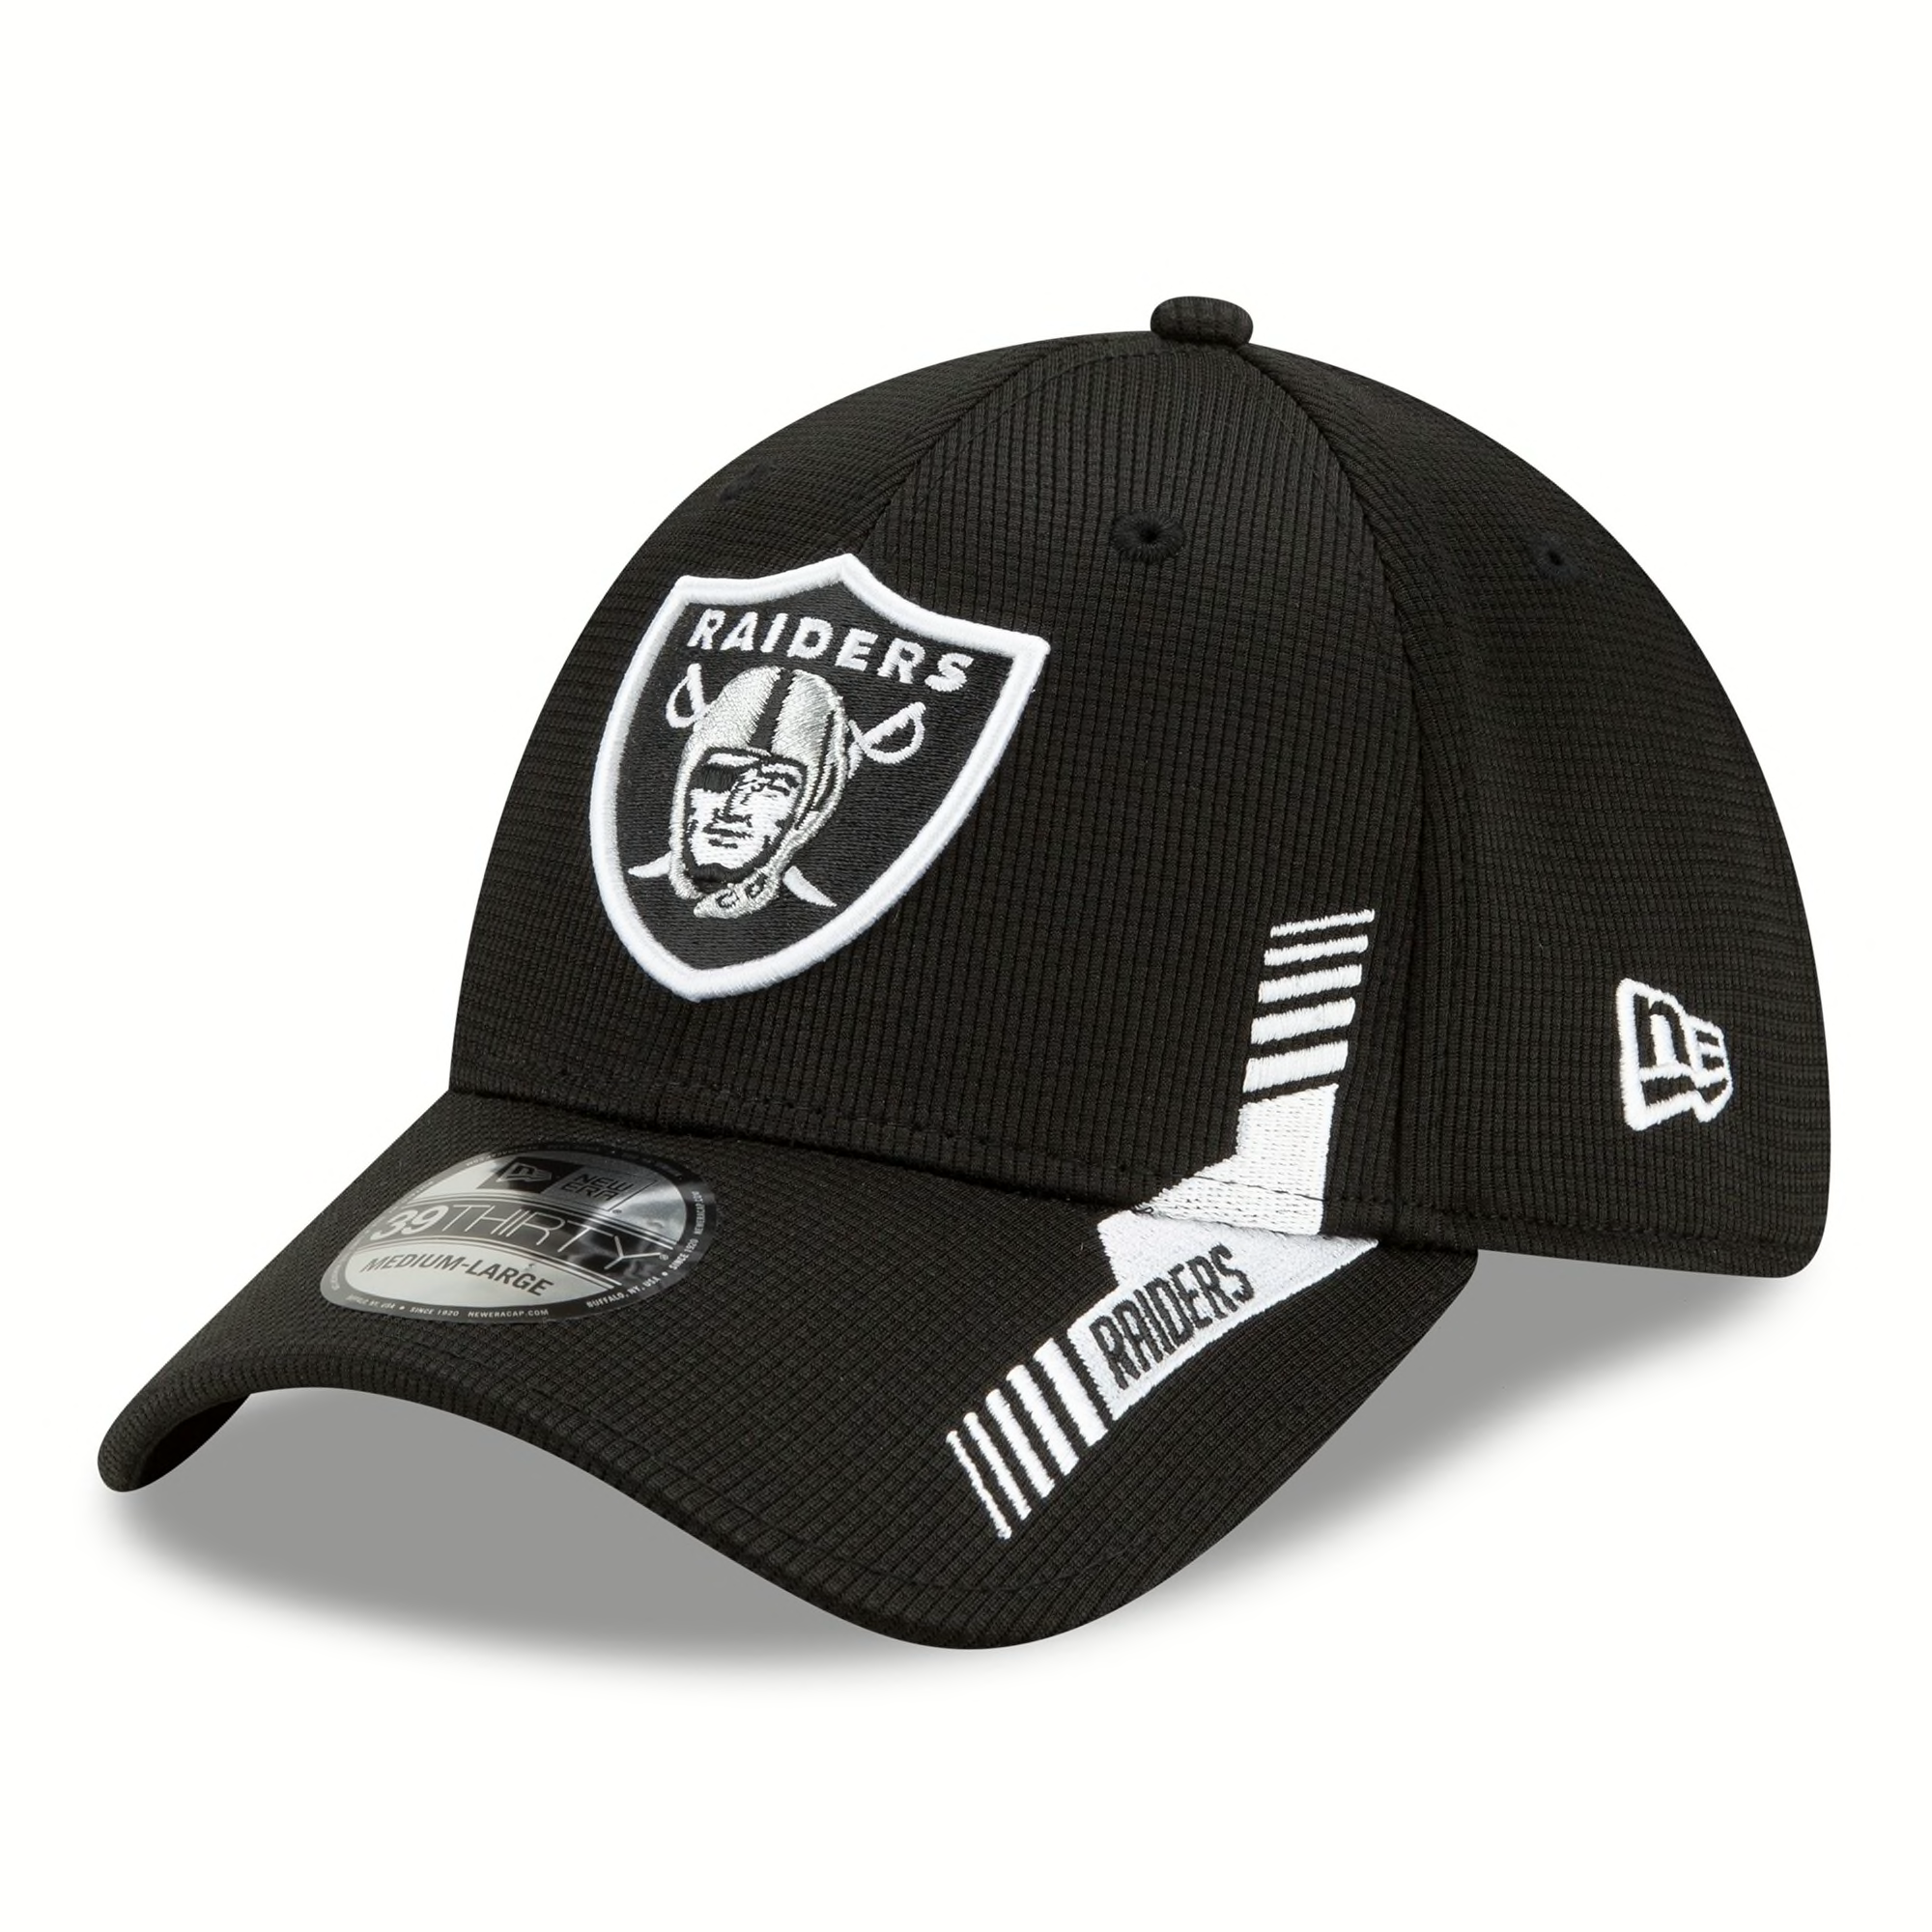 Perfect Holiday Gifts For The Las Vegas Raiders Fan